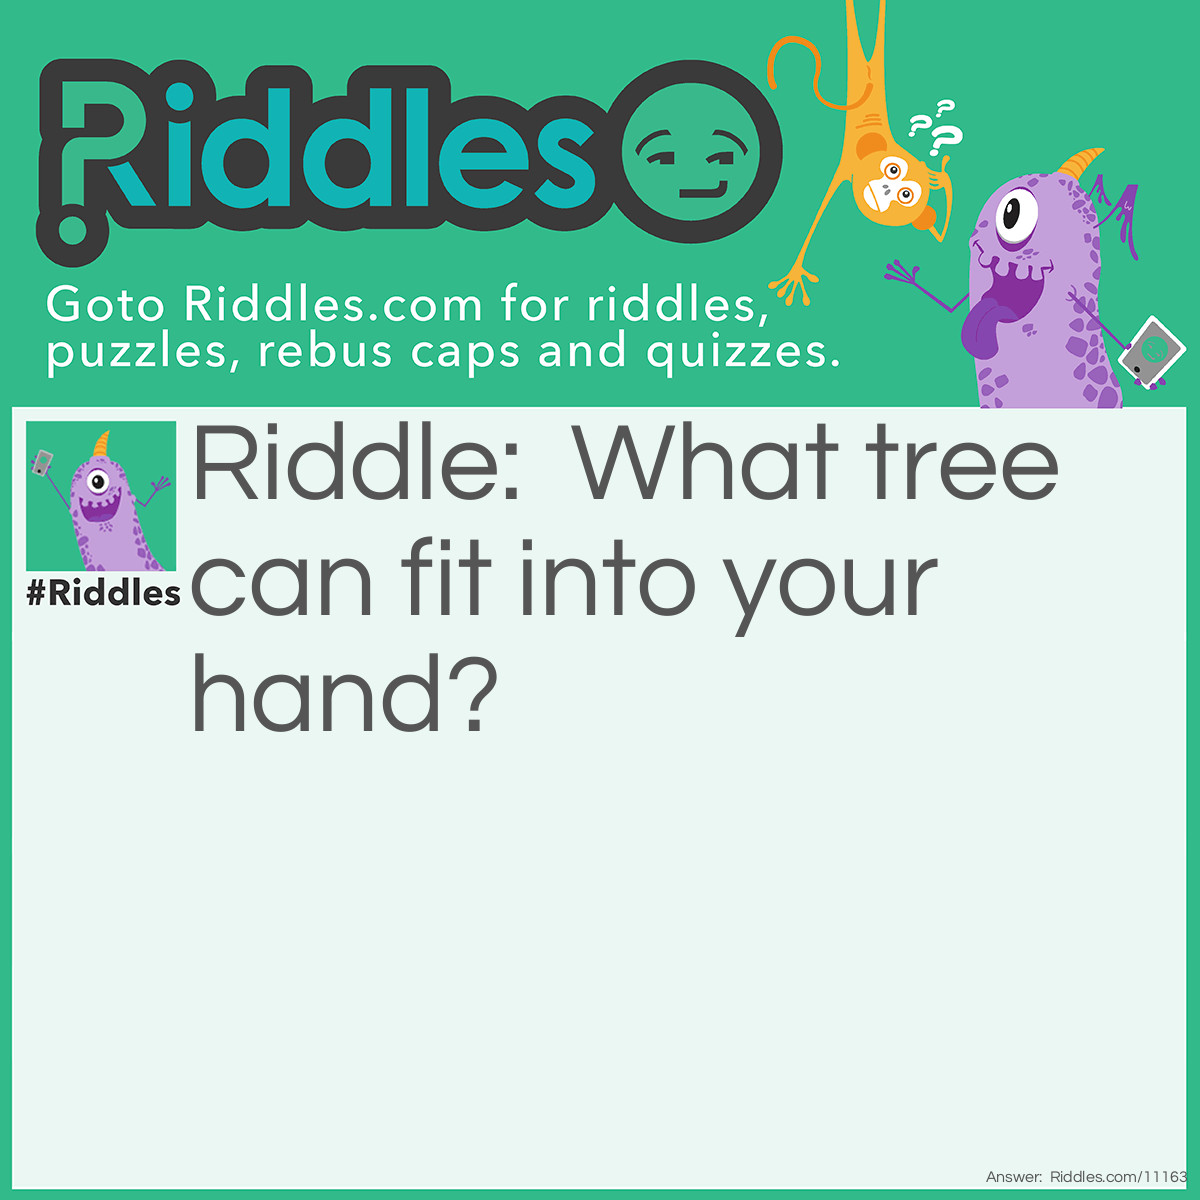 Riddle: What tree can fit into your hand? Answer: A palm tree